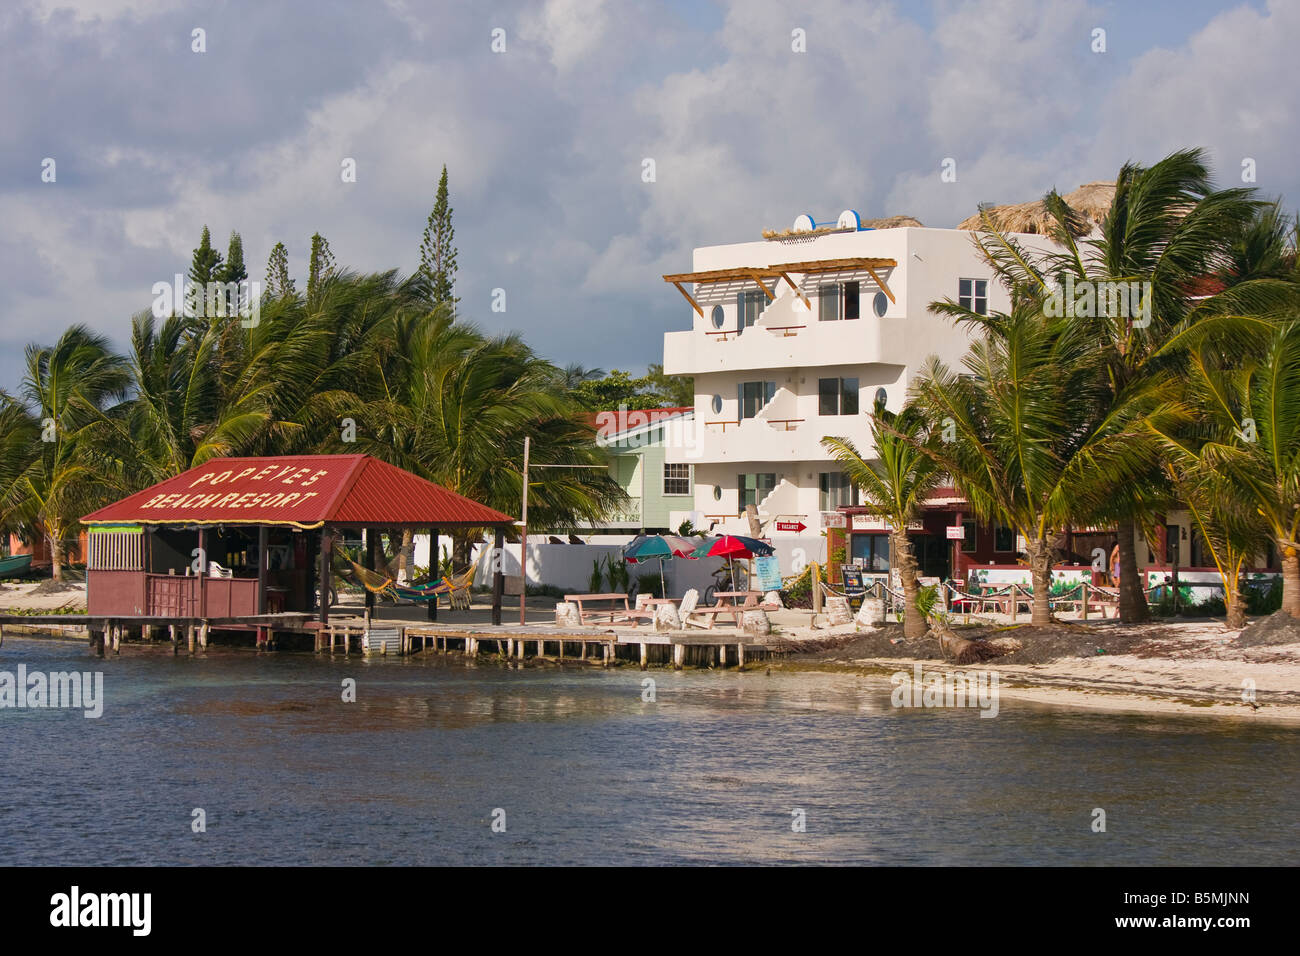 CAYE CAULKER, BELIZE - Hotels and palm trees on beach Stock Photo